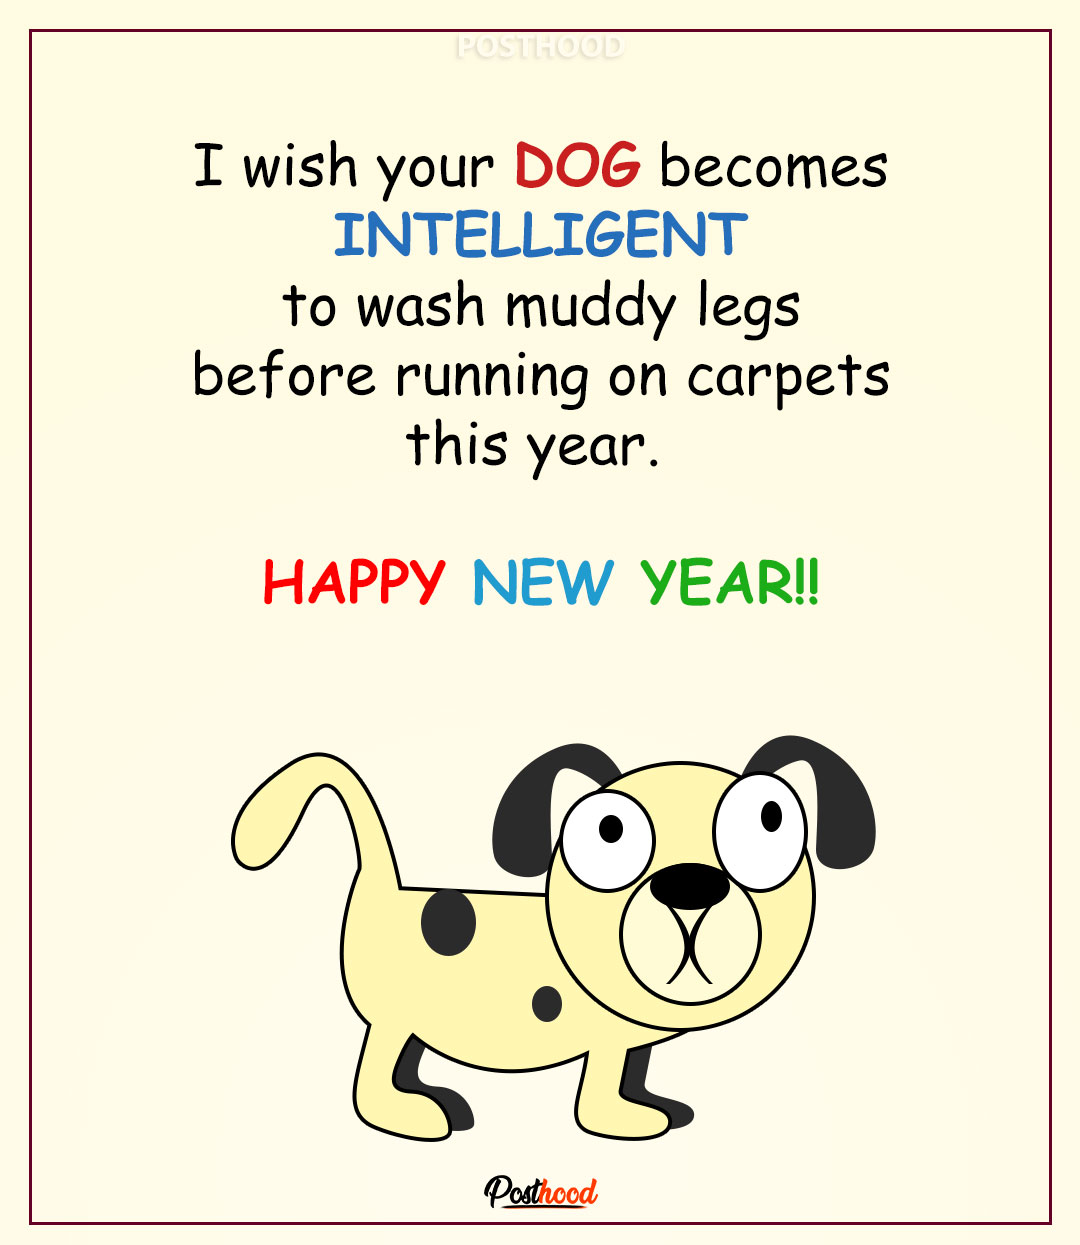 Funny New Year wishes for your dog lover friends. Find more 20 funny New Year Messages for friends and family to wish them good luck!